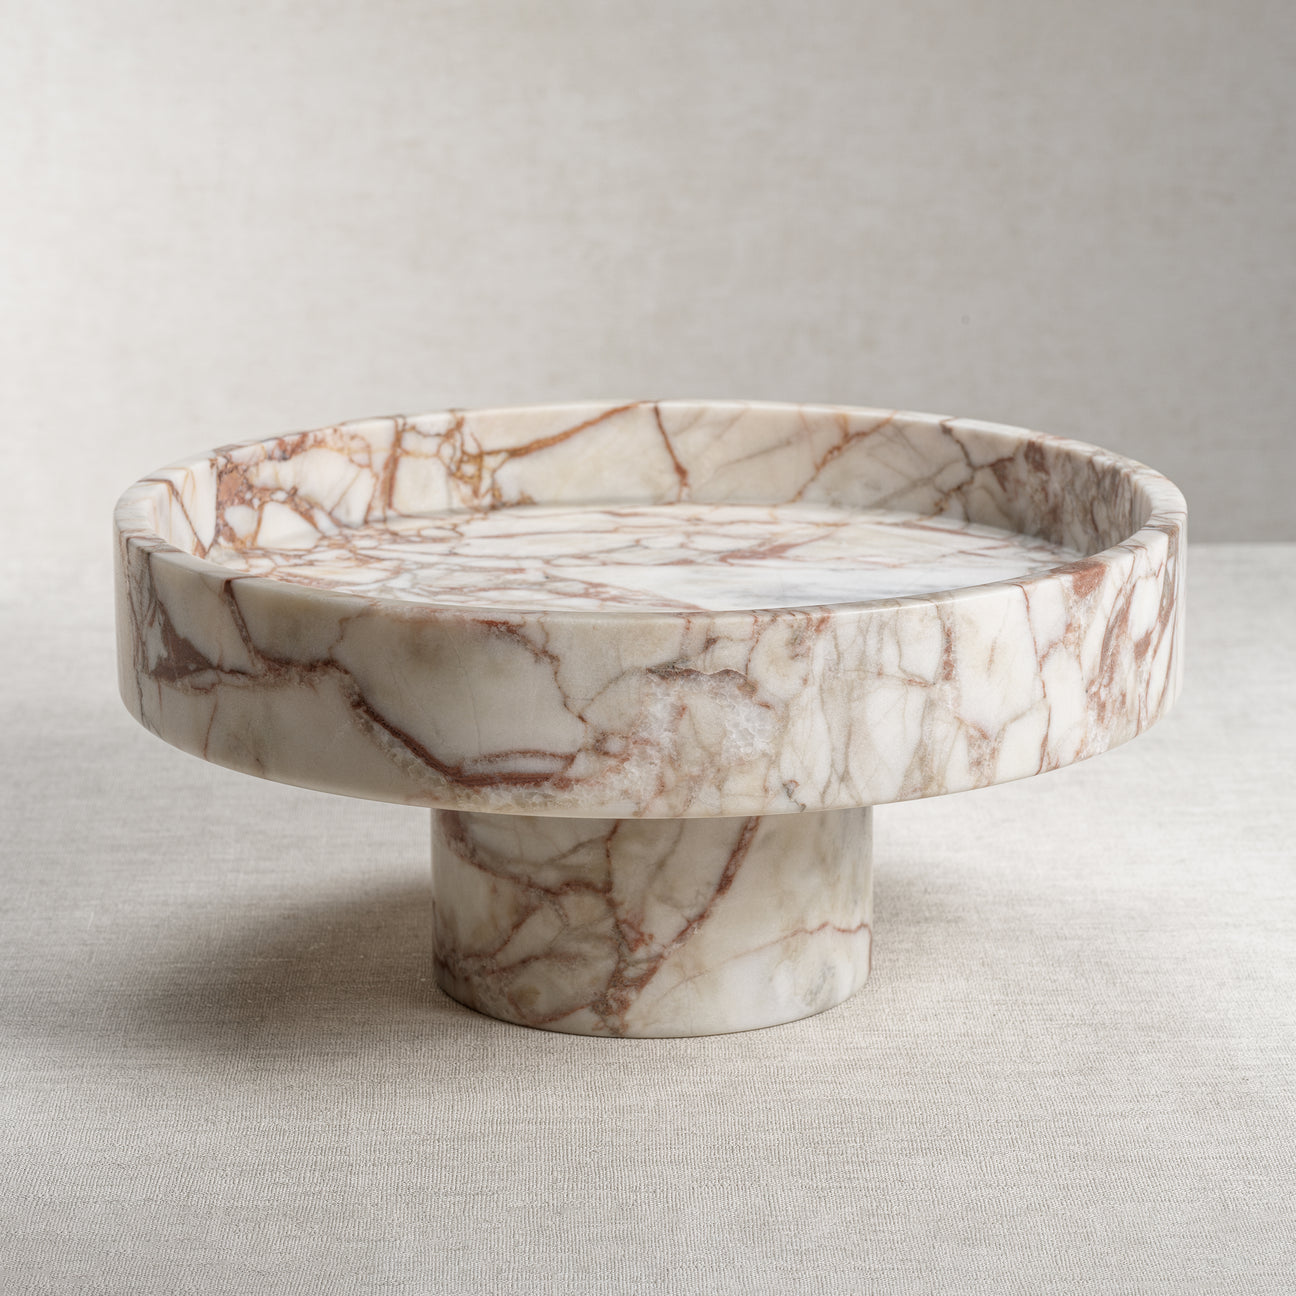 Footed Rosso Verona Marble Bowl